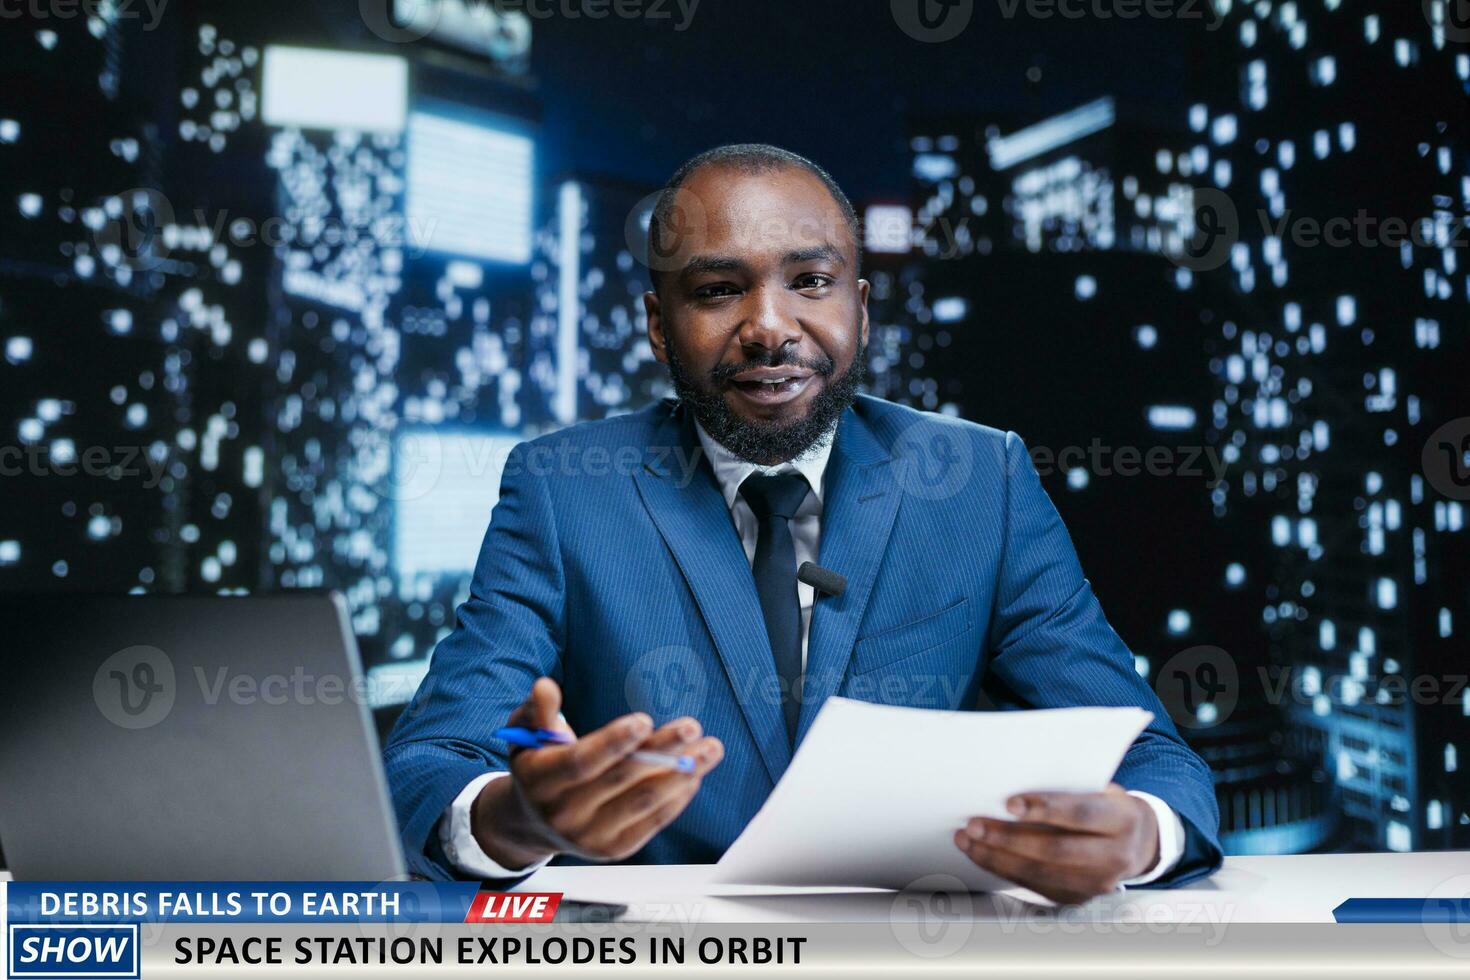 Breaking news about orbit explosion, debris falling from the sky and floating around the atmosphere. Man presenter creating newscast on space station bursting to flames, night show host. photo